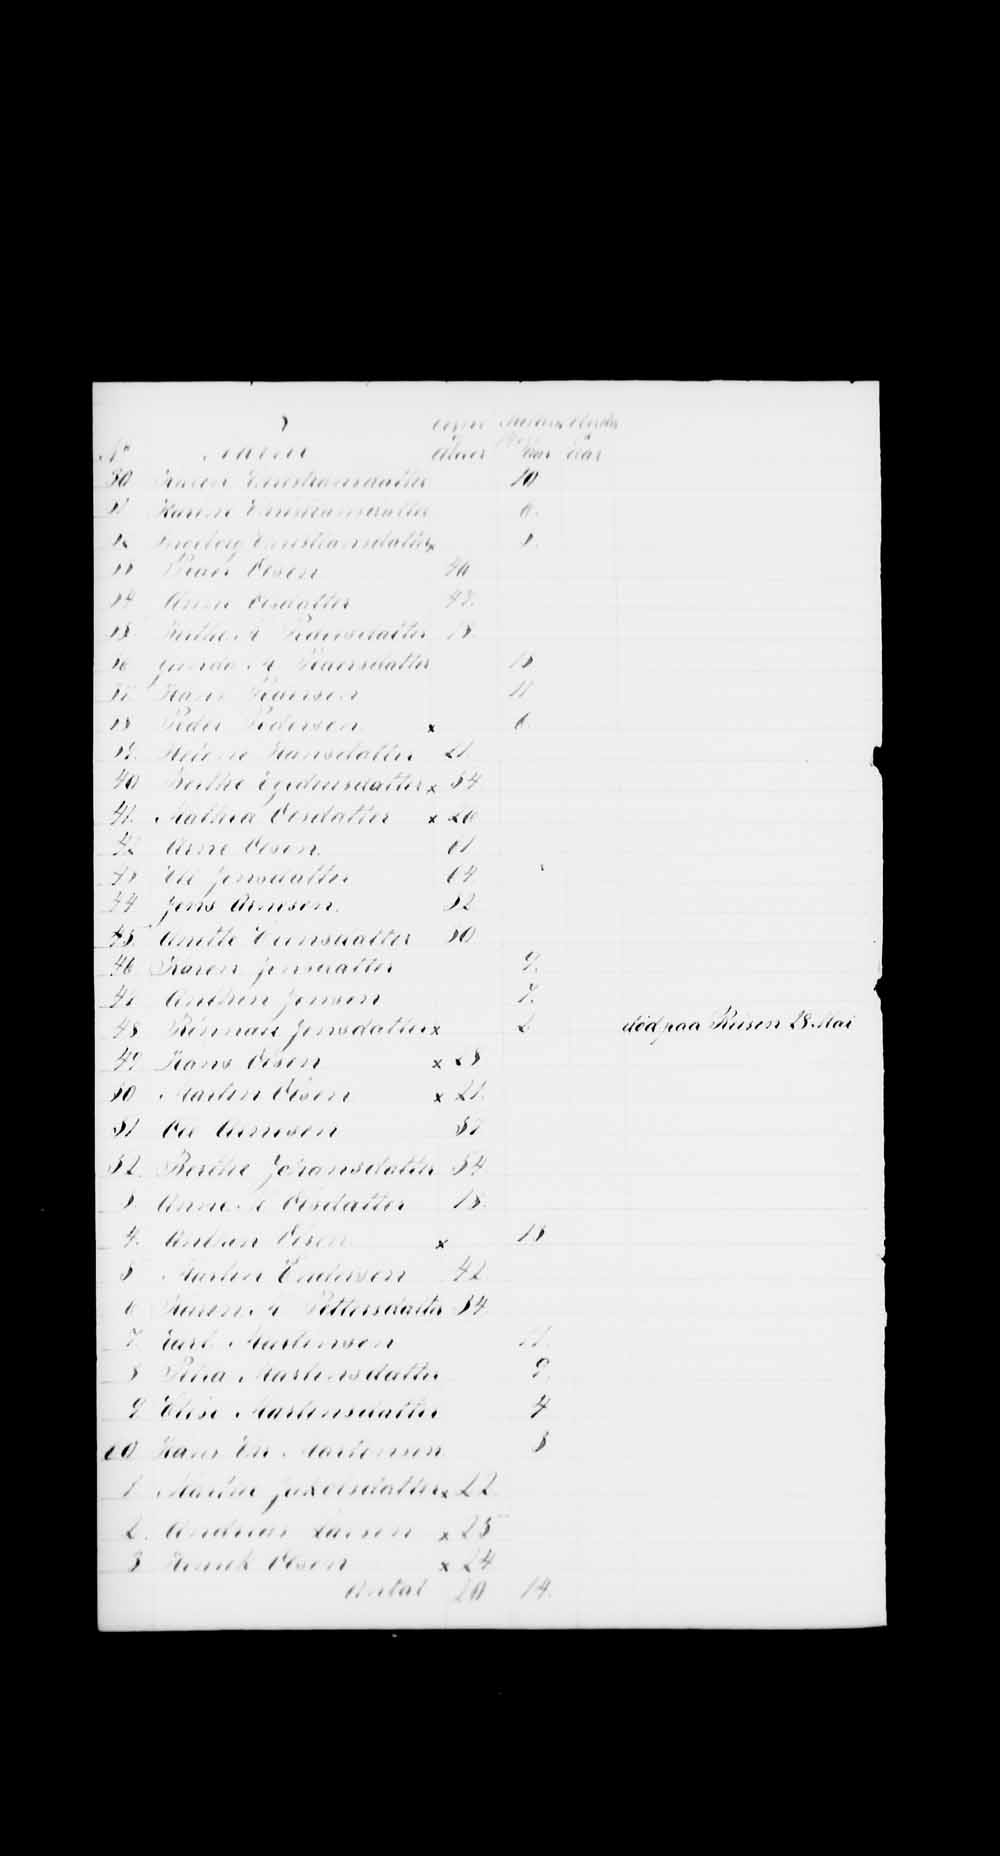 Digitized page of Passenger Lists for Image No.: e003530333